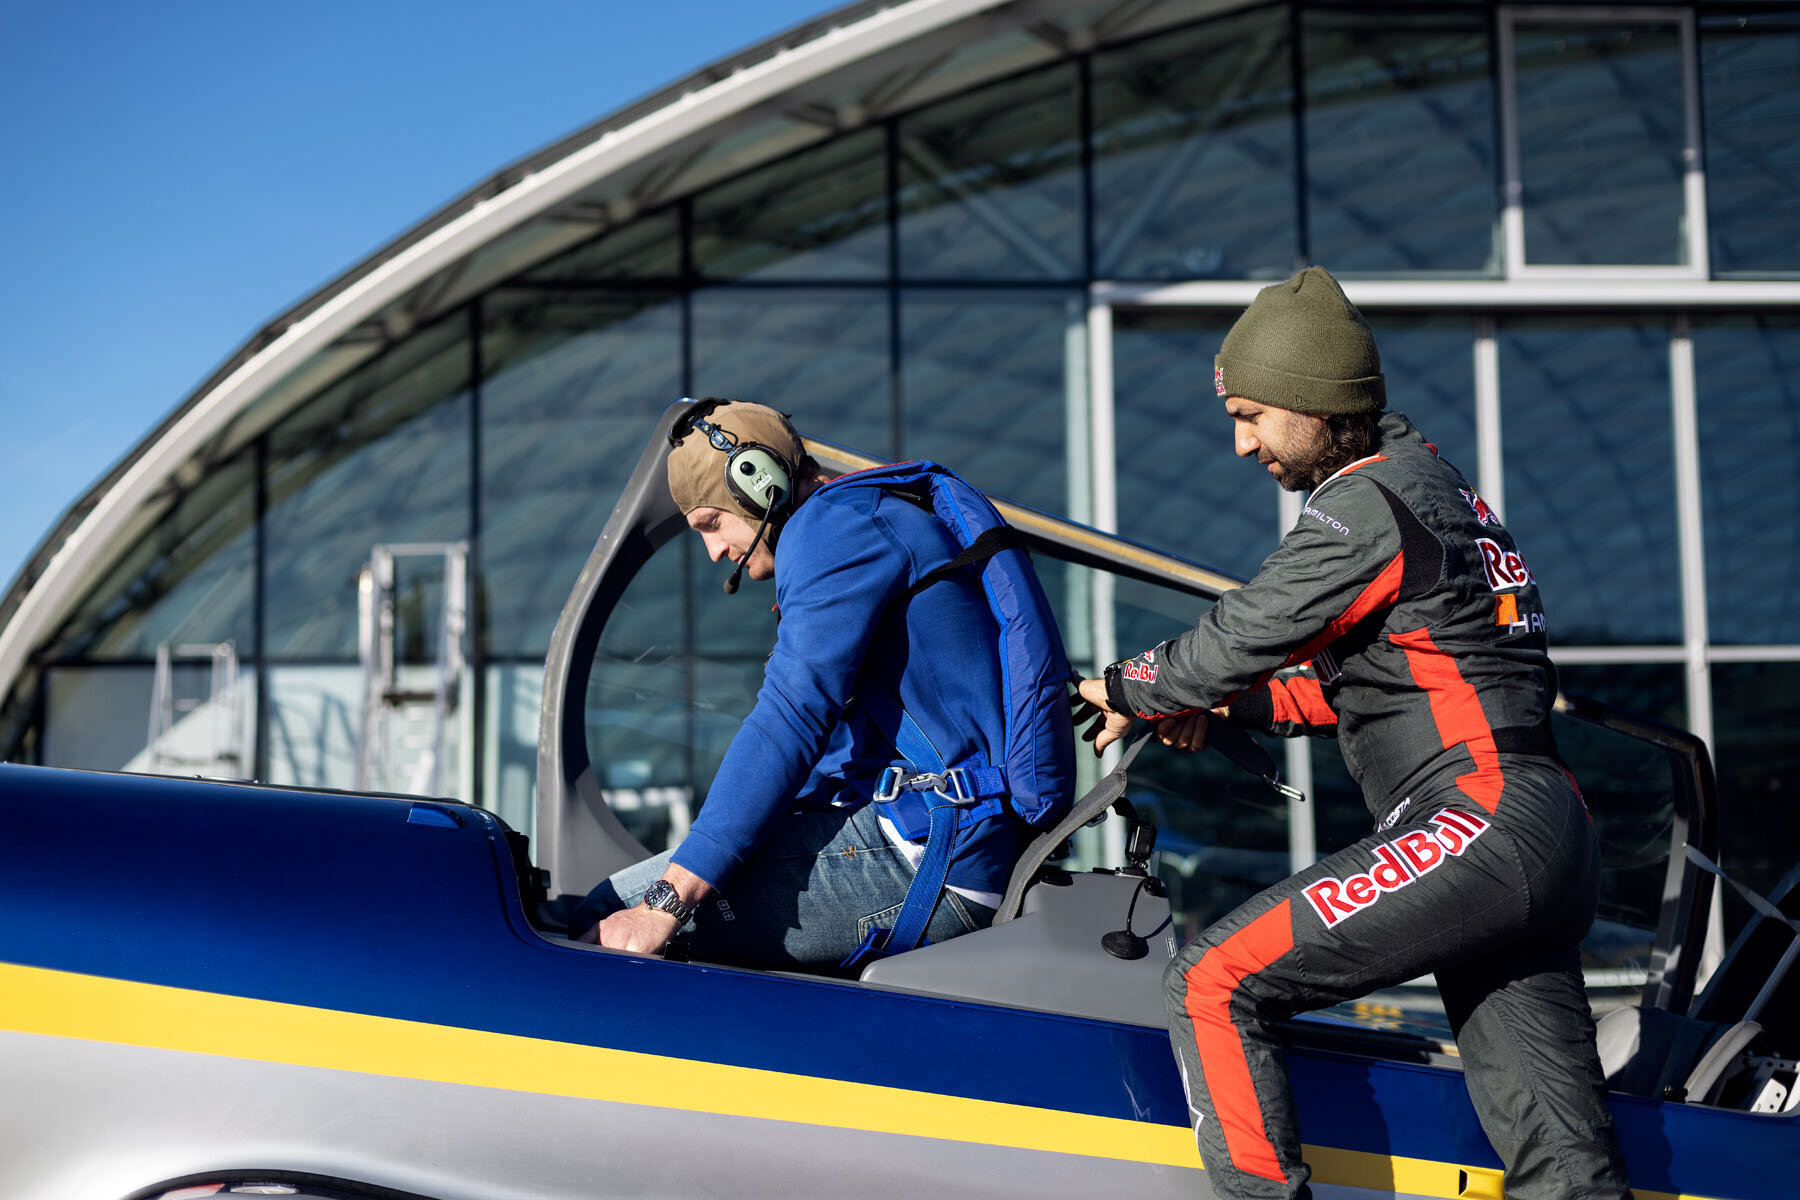  Beauden Barret is seen preparing for his first ever  acrobatic tandem flight with pilot Dario Costa during his visit to Hangar-7 in Salzburg, Austria on November 29, 2018 